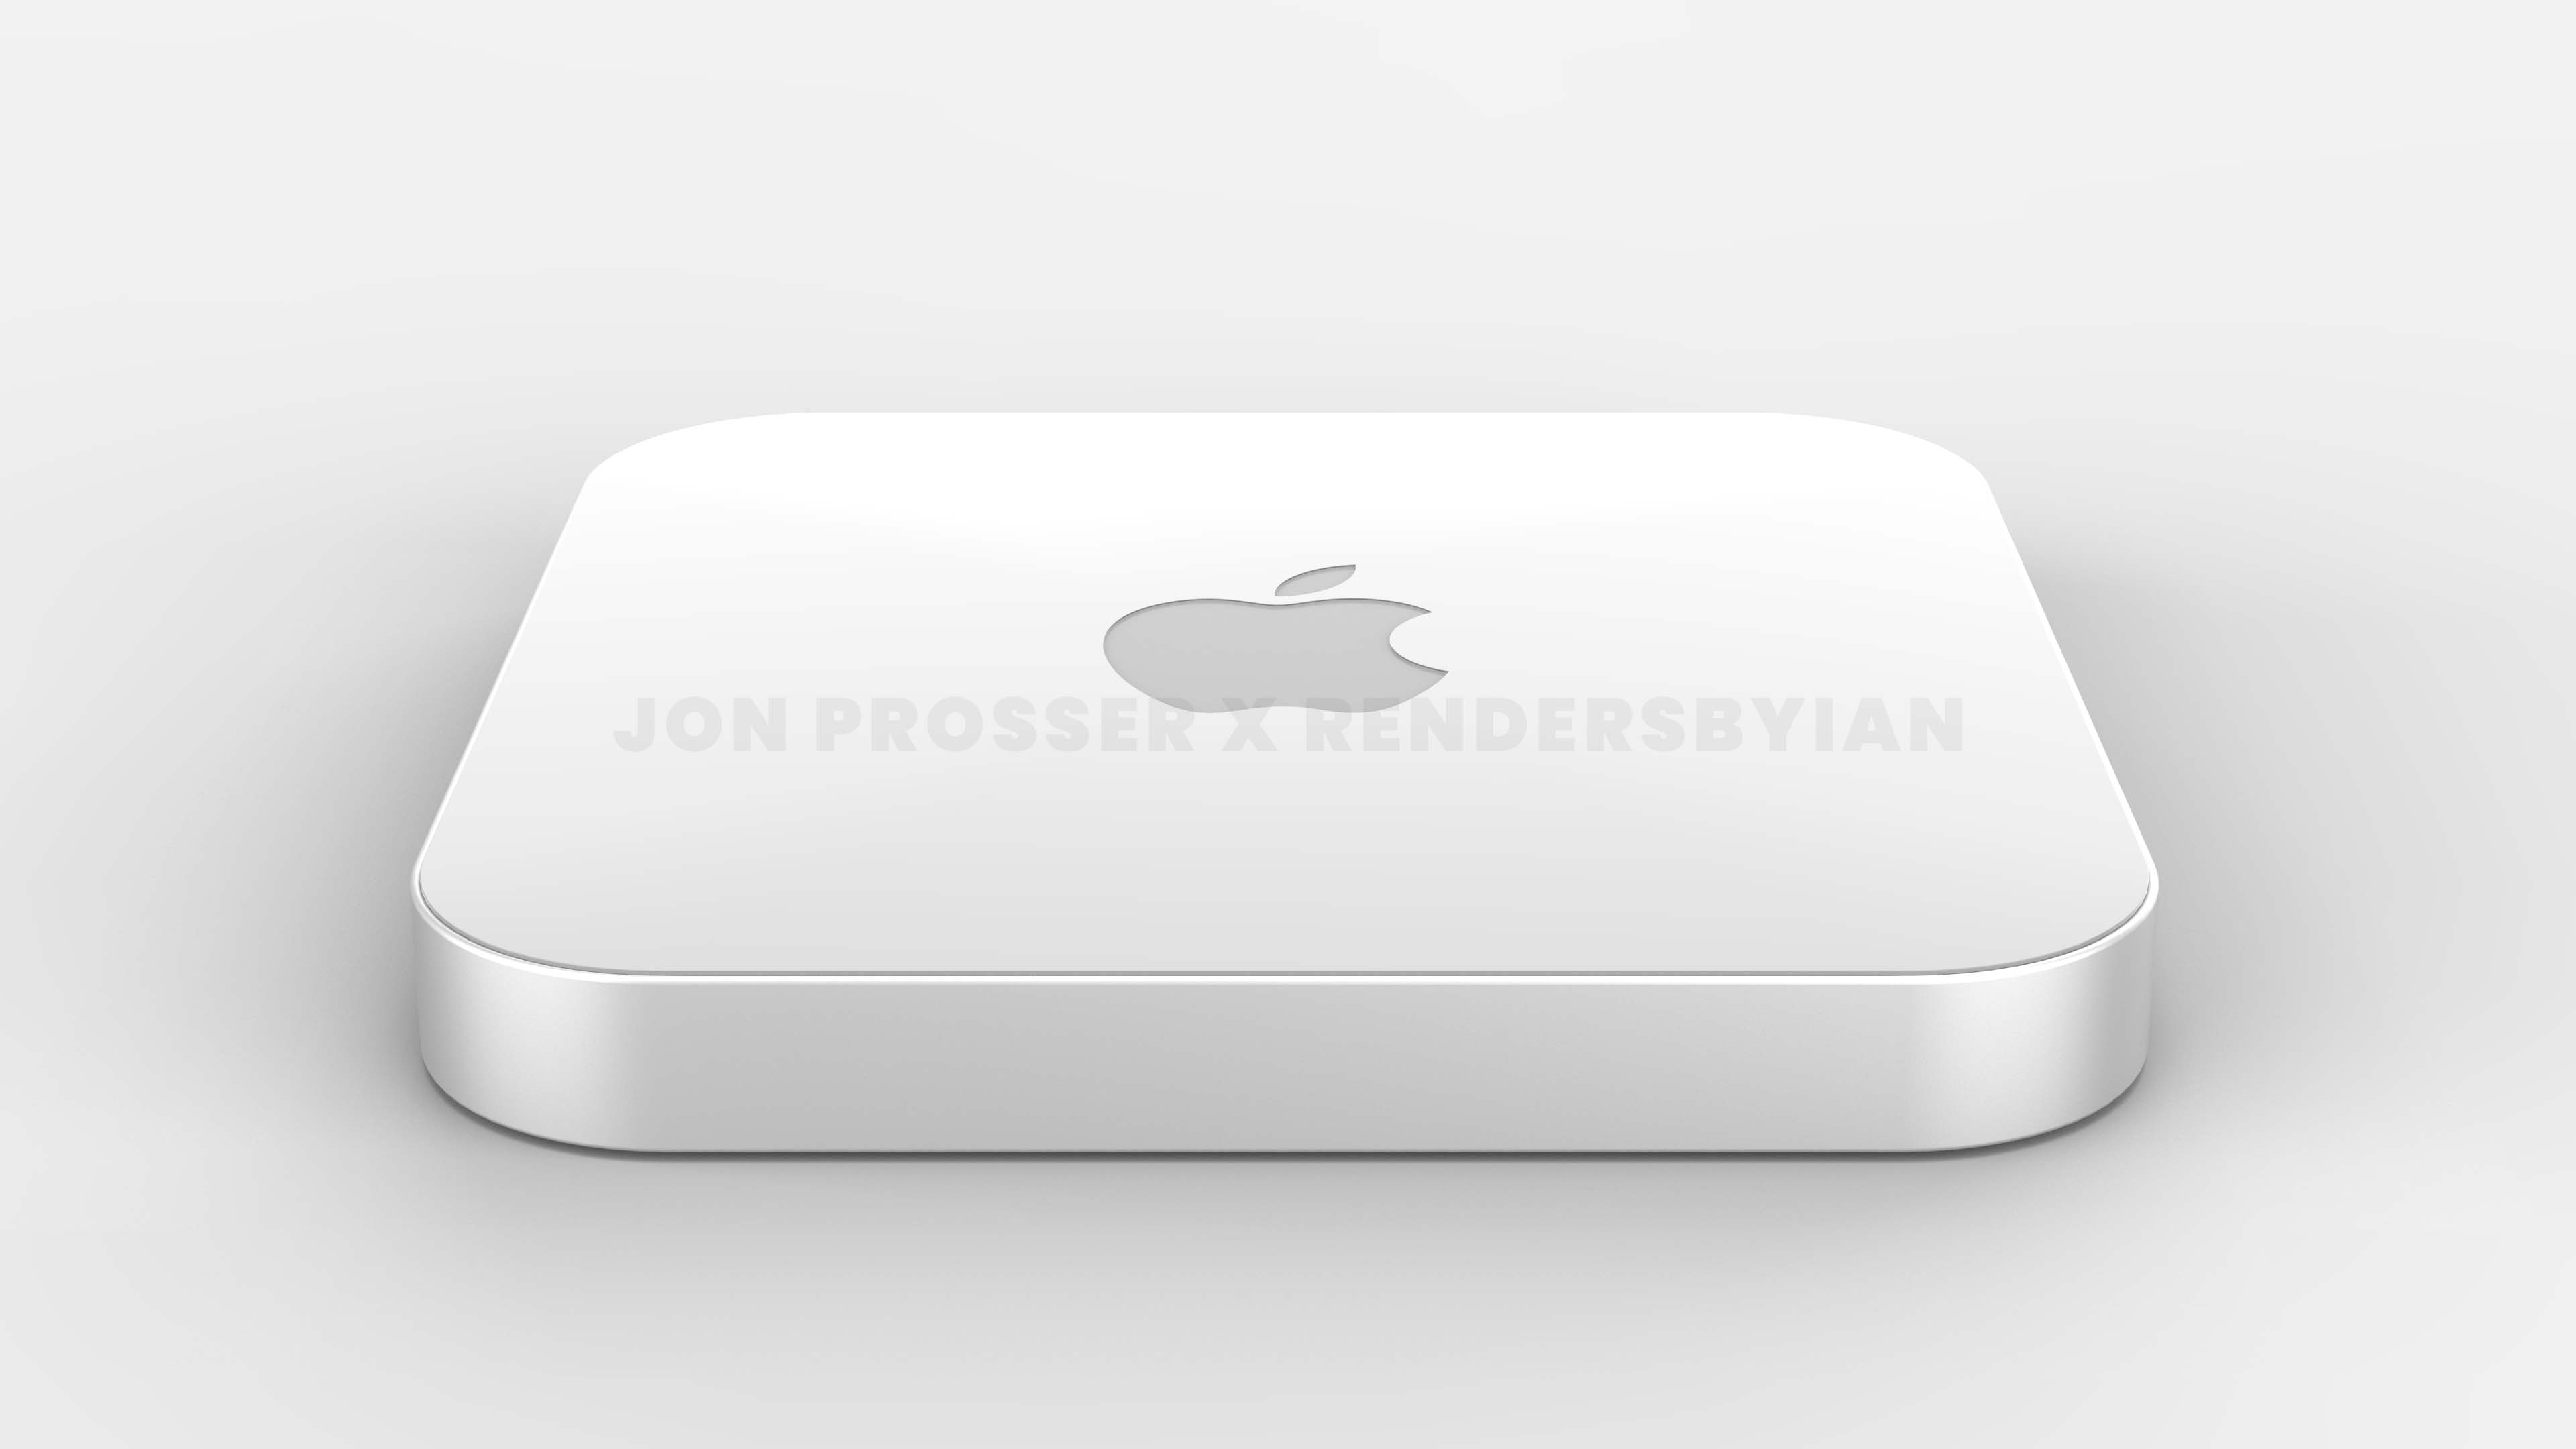 New Mac mini leaked - what you need to know